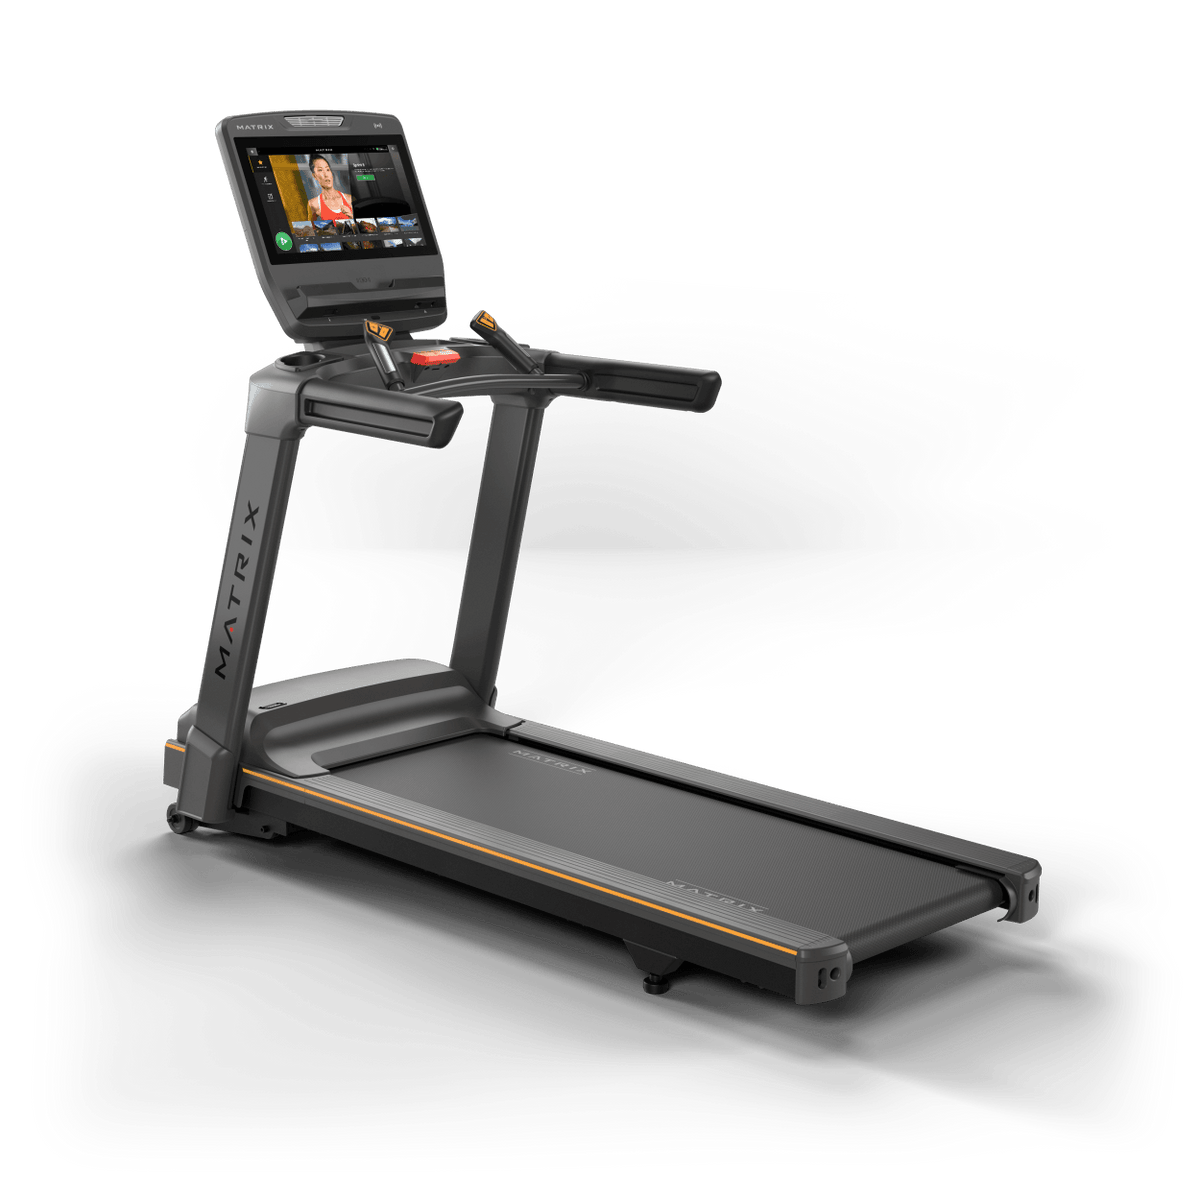 Matrix Fitness Lifestyle Treadmill with Touch XL Console full view | Fitness Experience